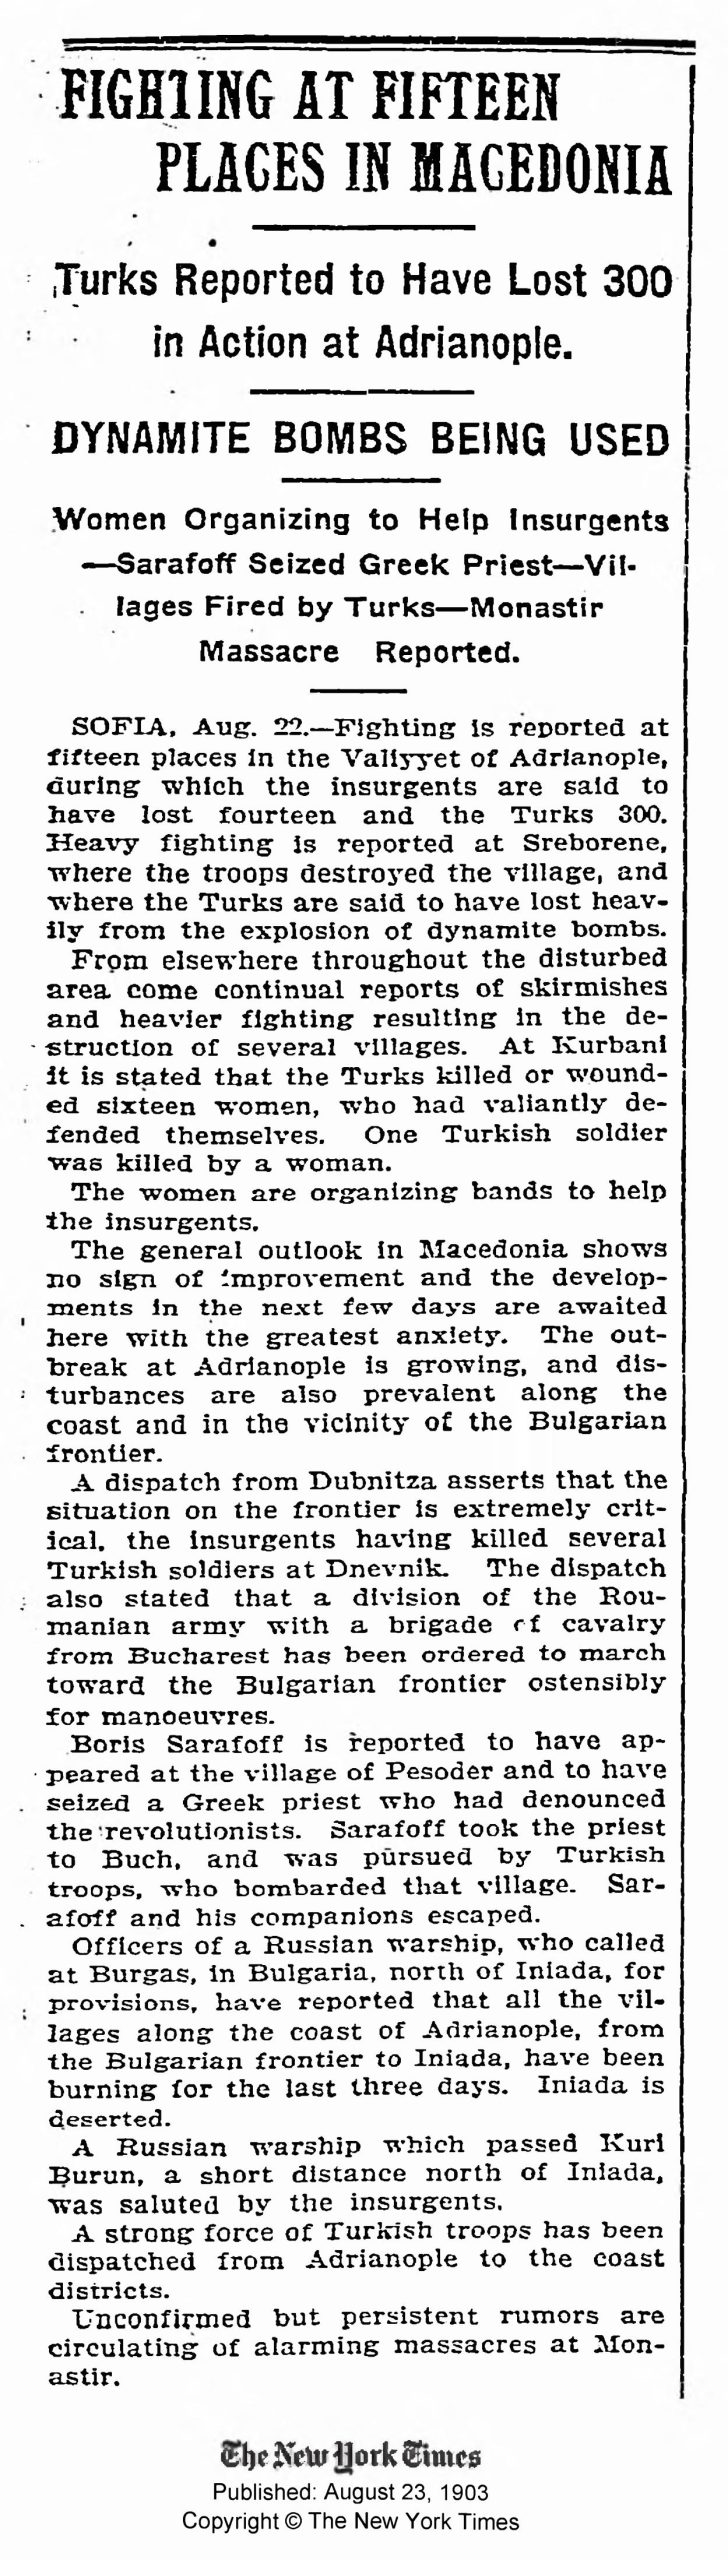 1903.08.23_The New York Times - Fighting at 15 places in Macedonia